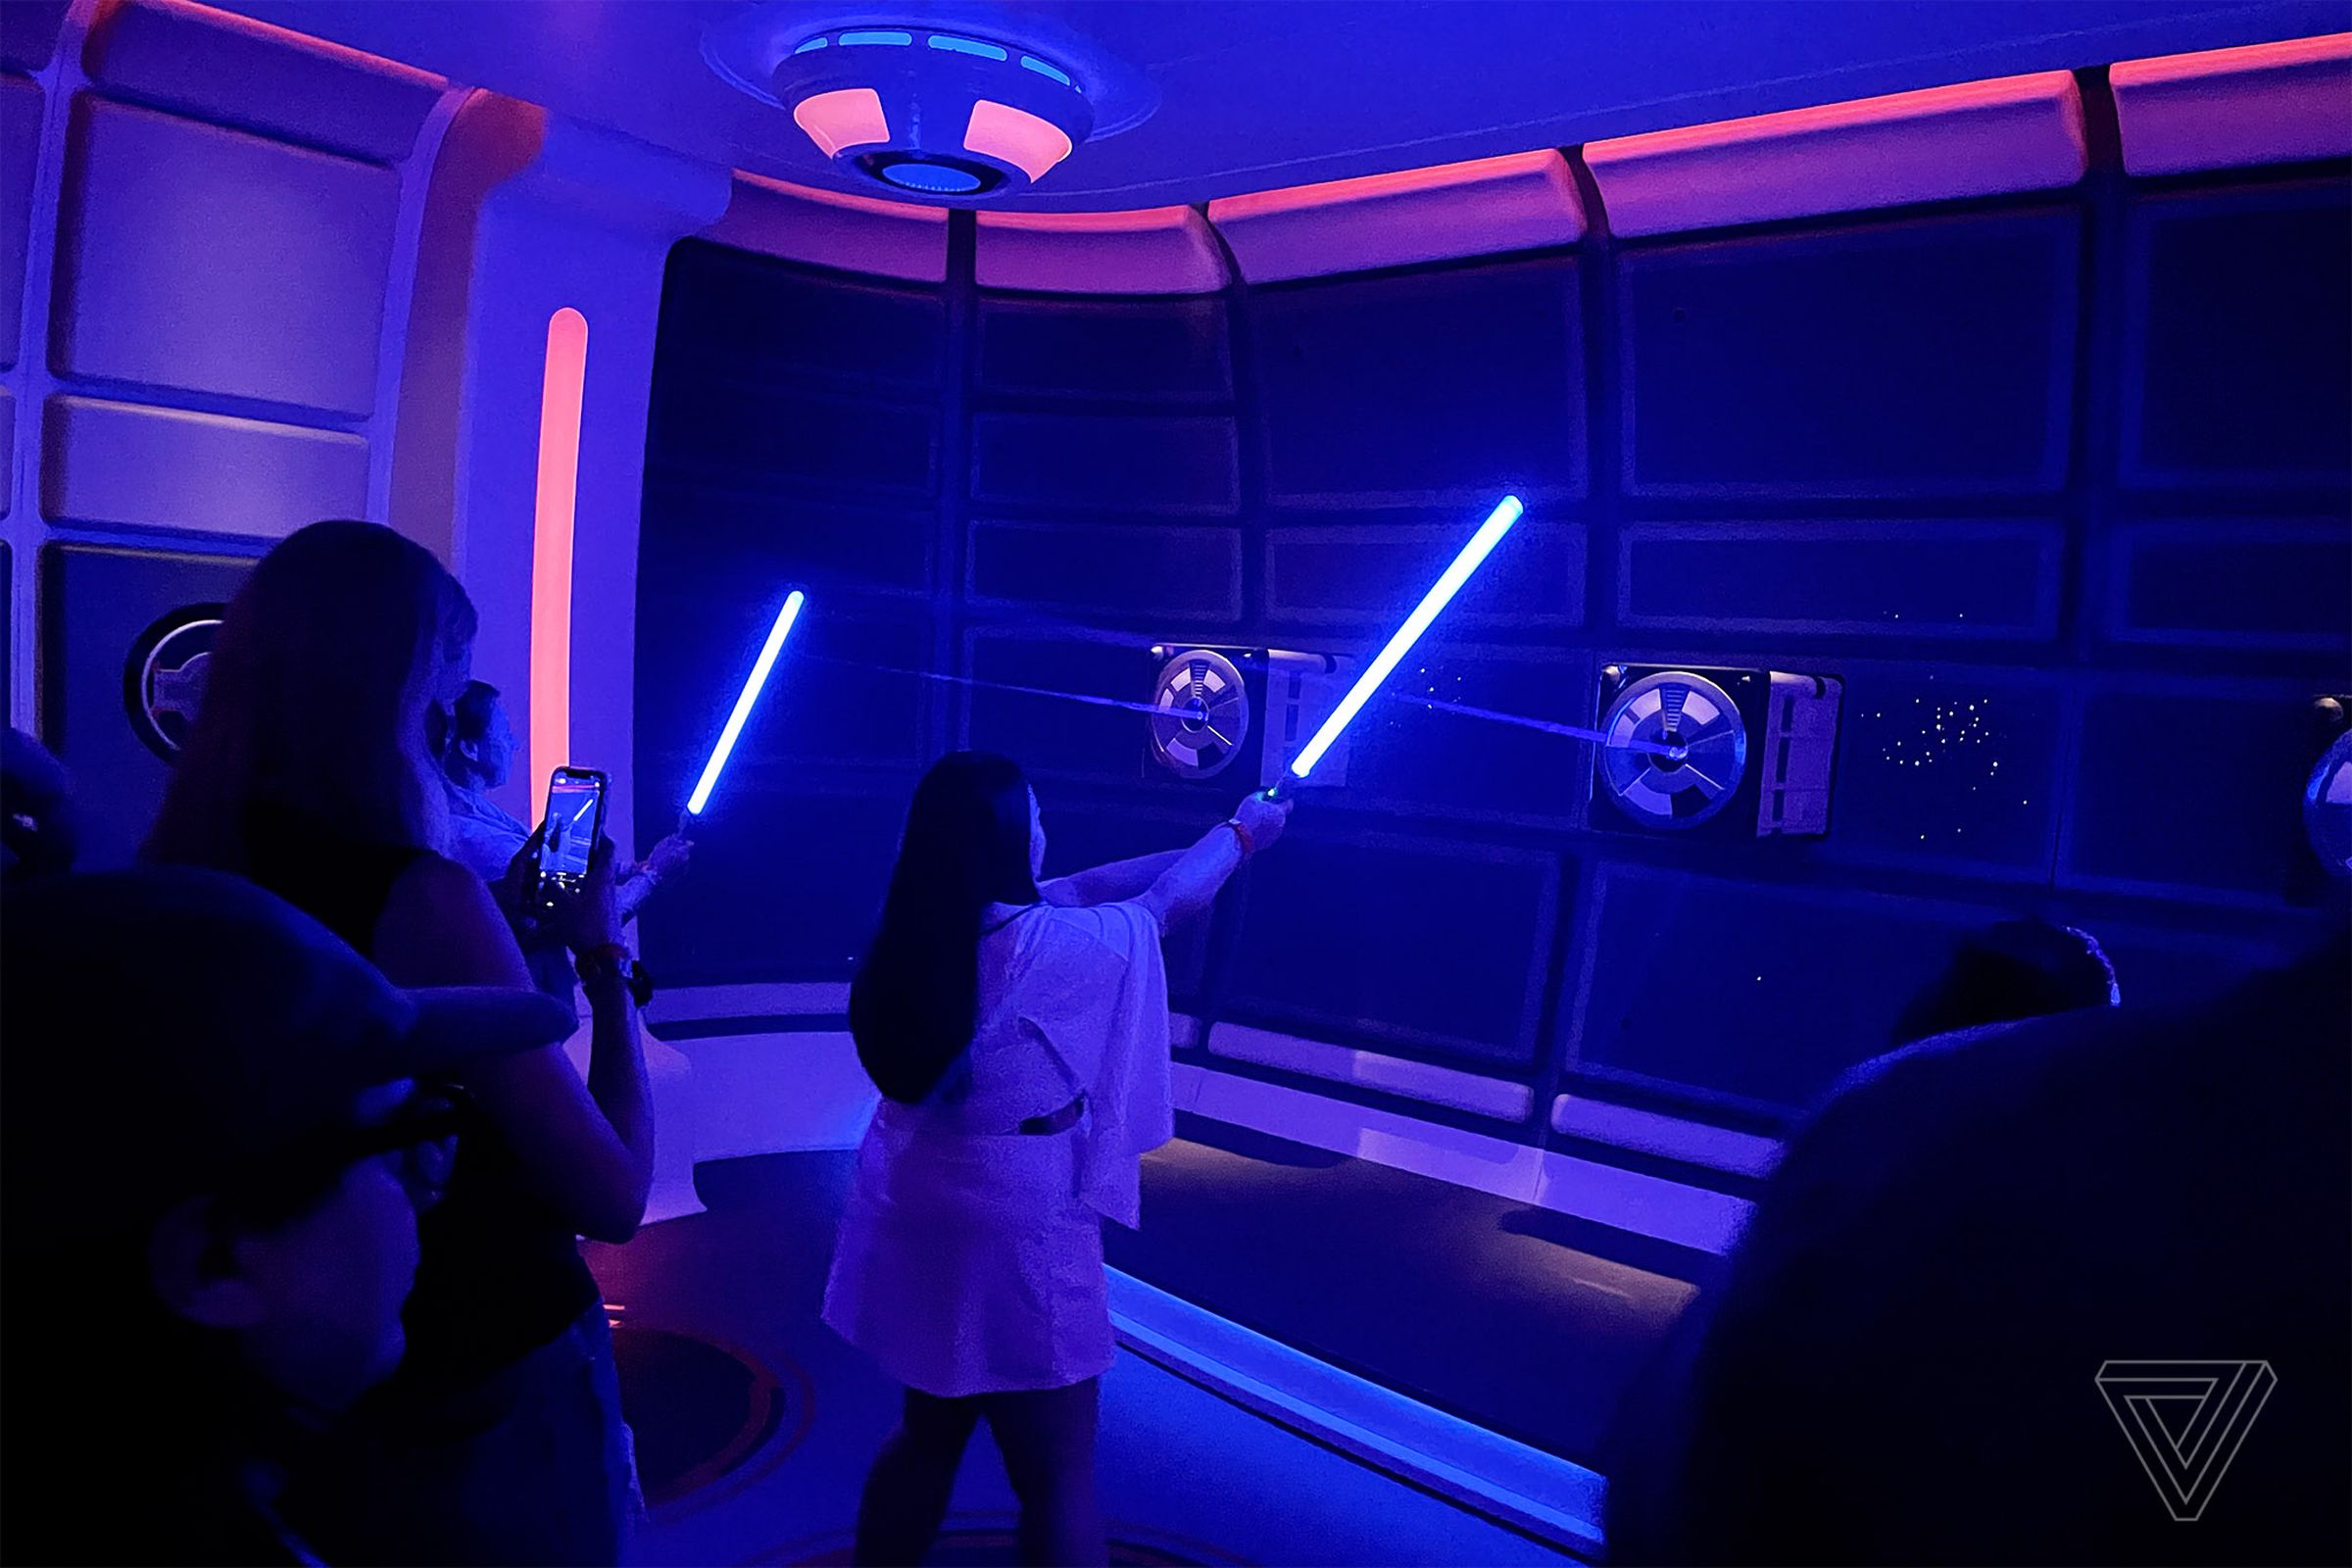 Learning the ways of the Jedi in the ship’s lightsaber training pod activity.